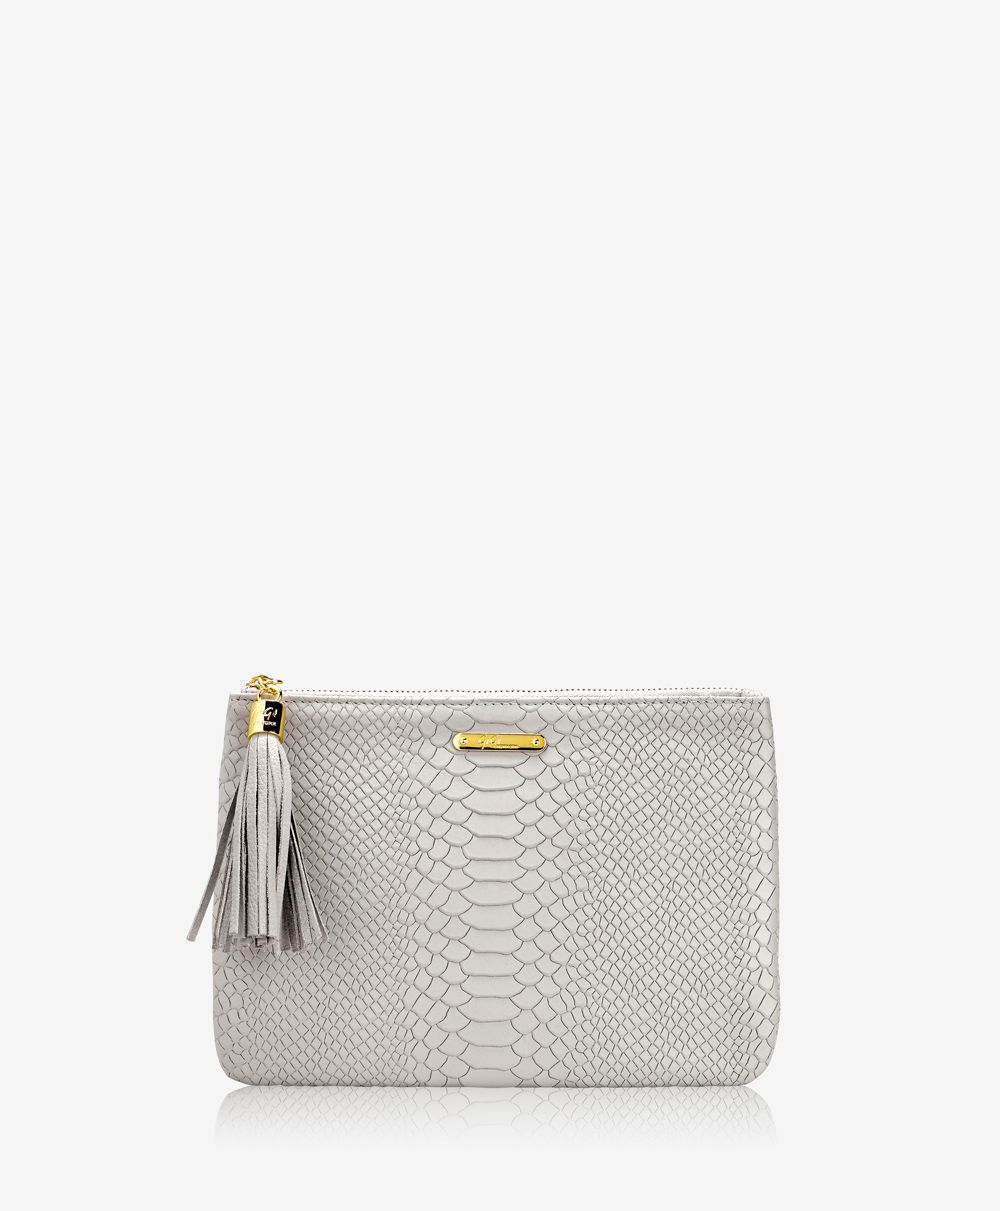 All in One Bag Oyster Embossed Python Leather | GiGi New York